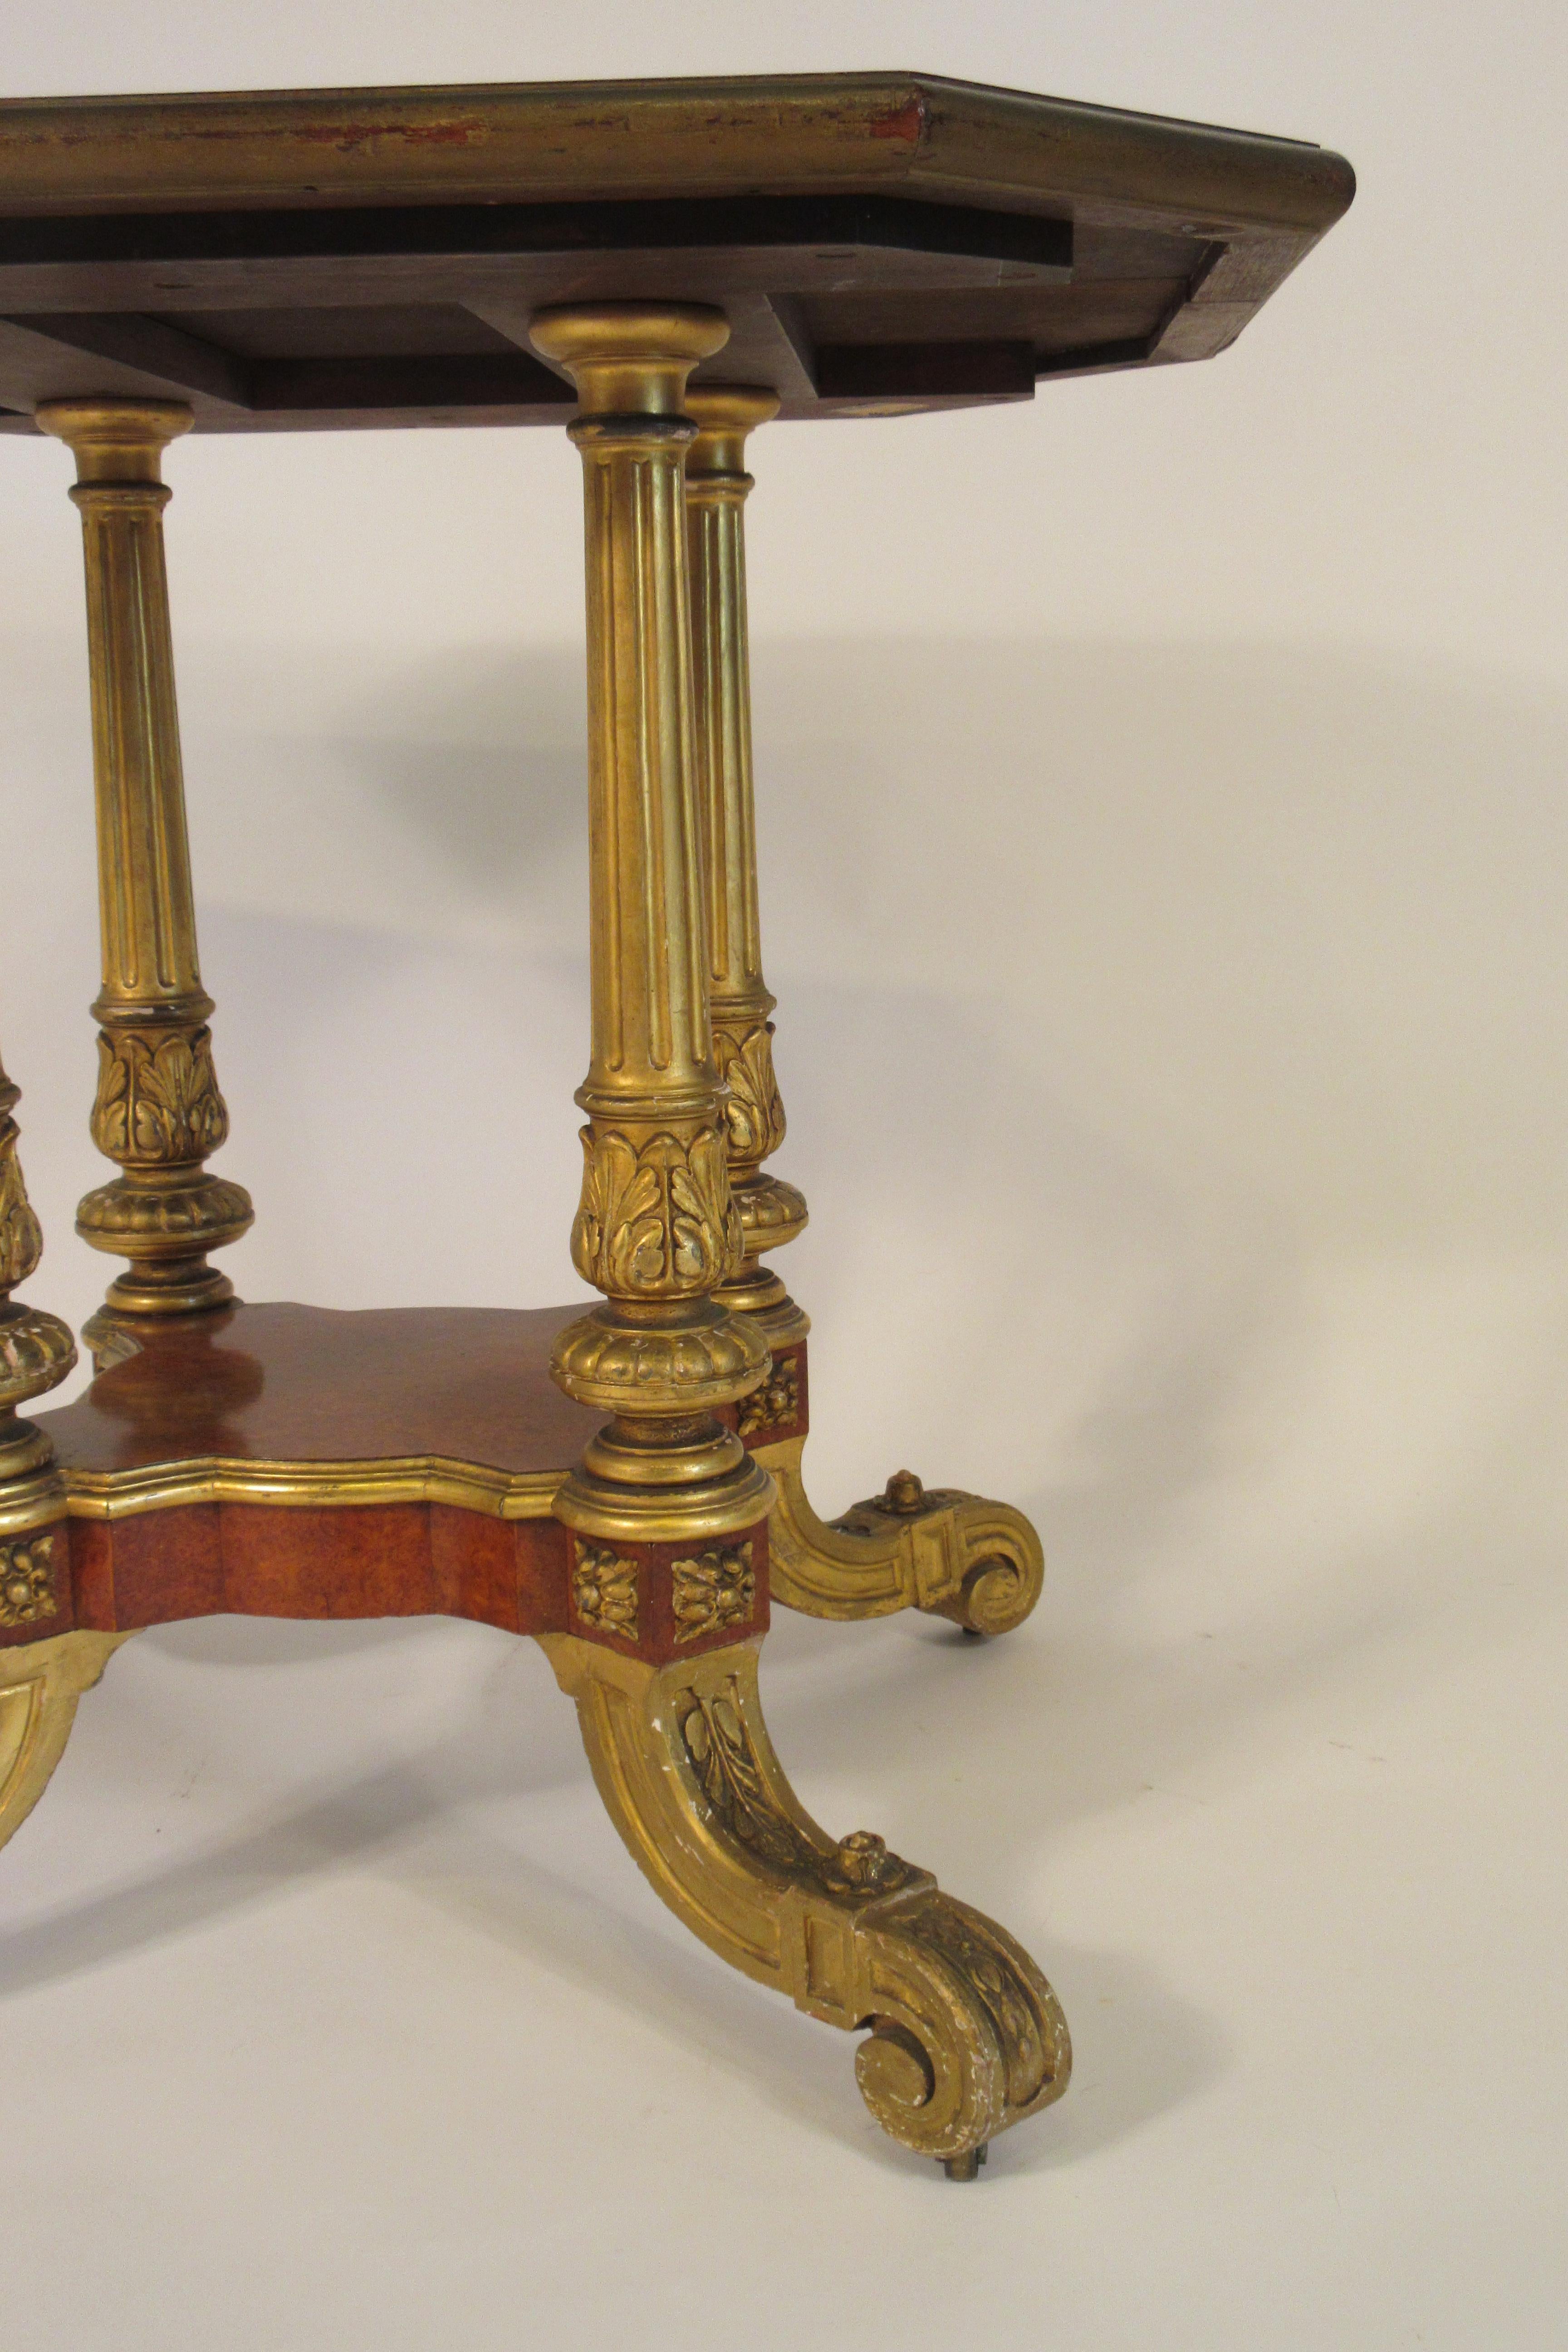 1880s French Gilt Carved Wood Table with Leather Top 2